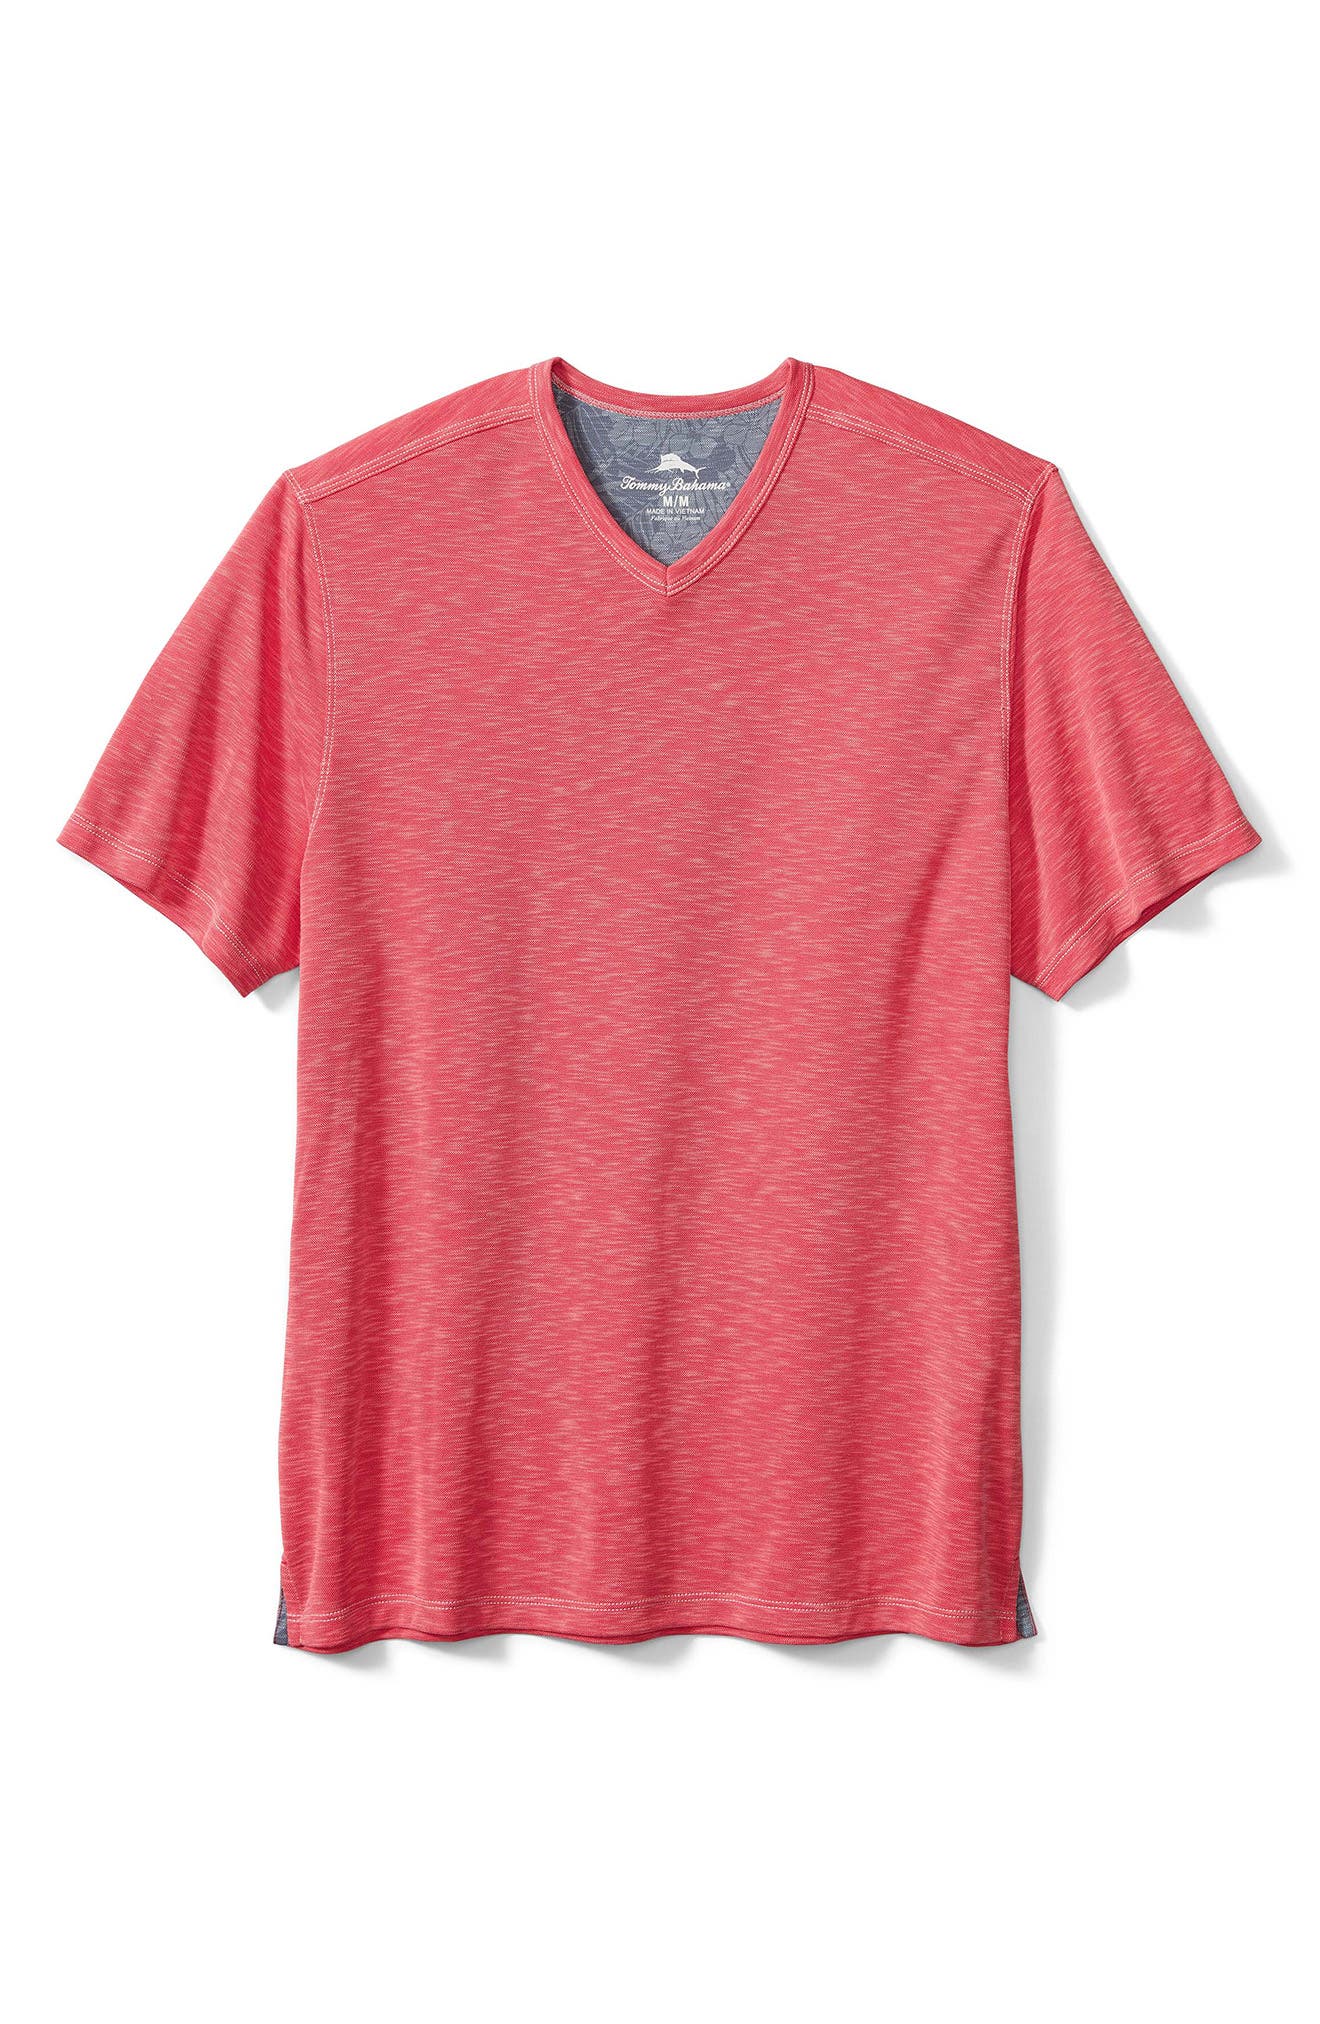 Tommy Bahama Palmetto Paradise V-Neck T-Shirt in Pink Plumeria at Nordstrom